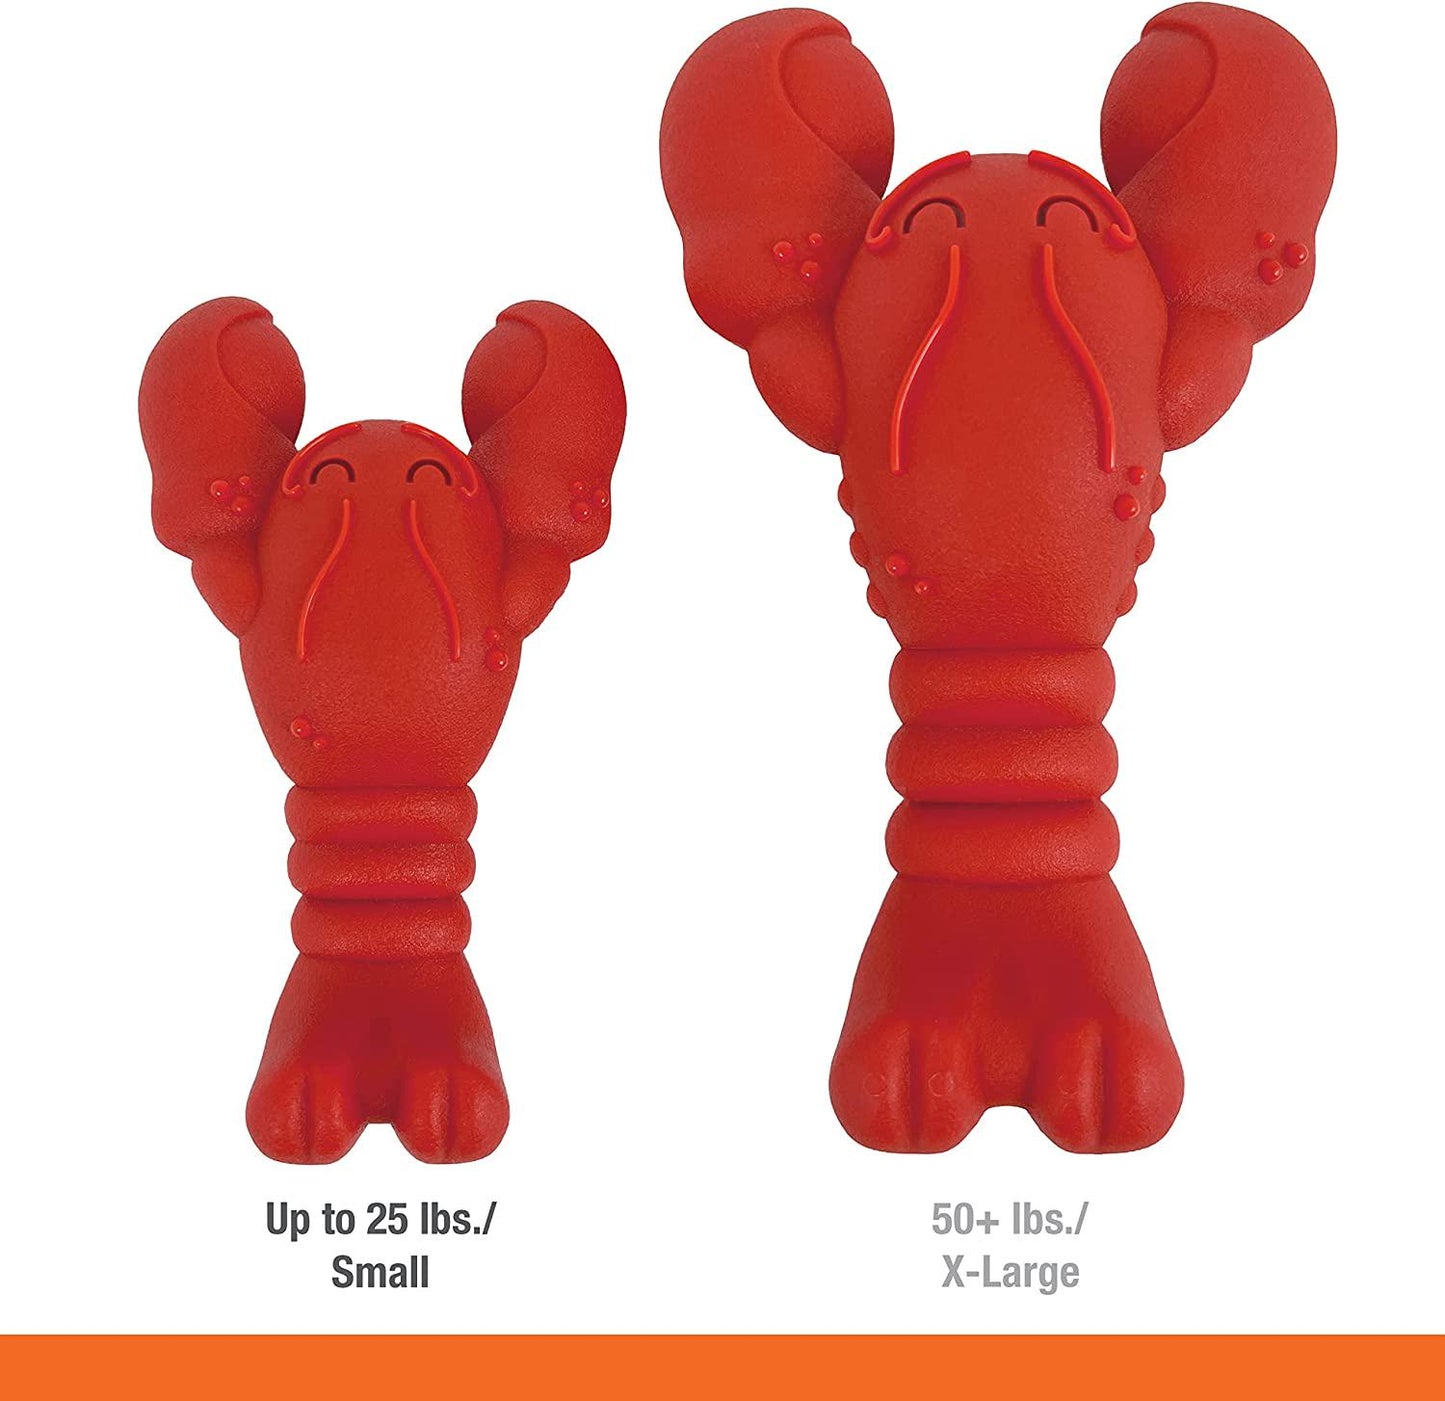 Lobster Dog Toy Power Chew Cute Dog Toys for Aggressive Chewers with a Funny Twist! Filet Mignon Flavor, Small/Regular (1 Count)